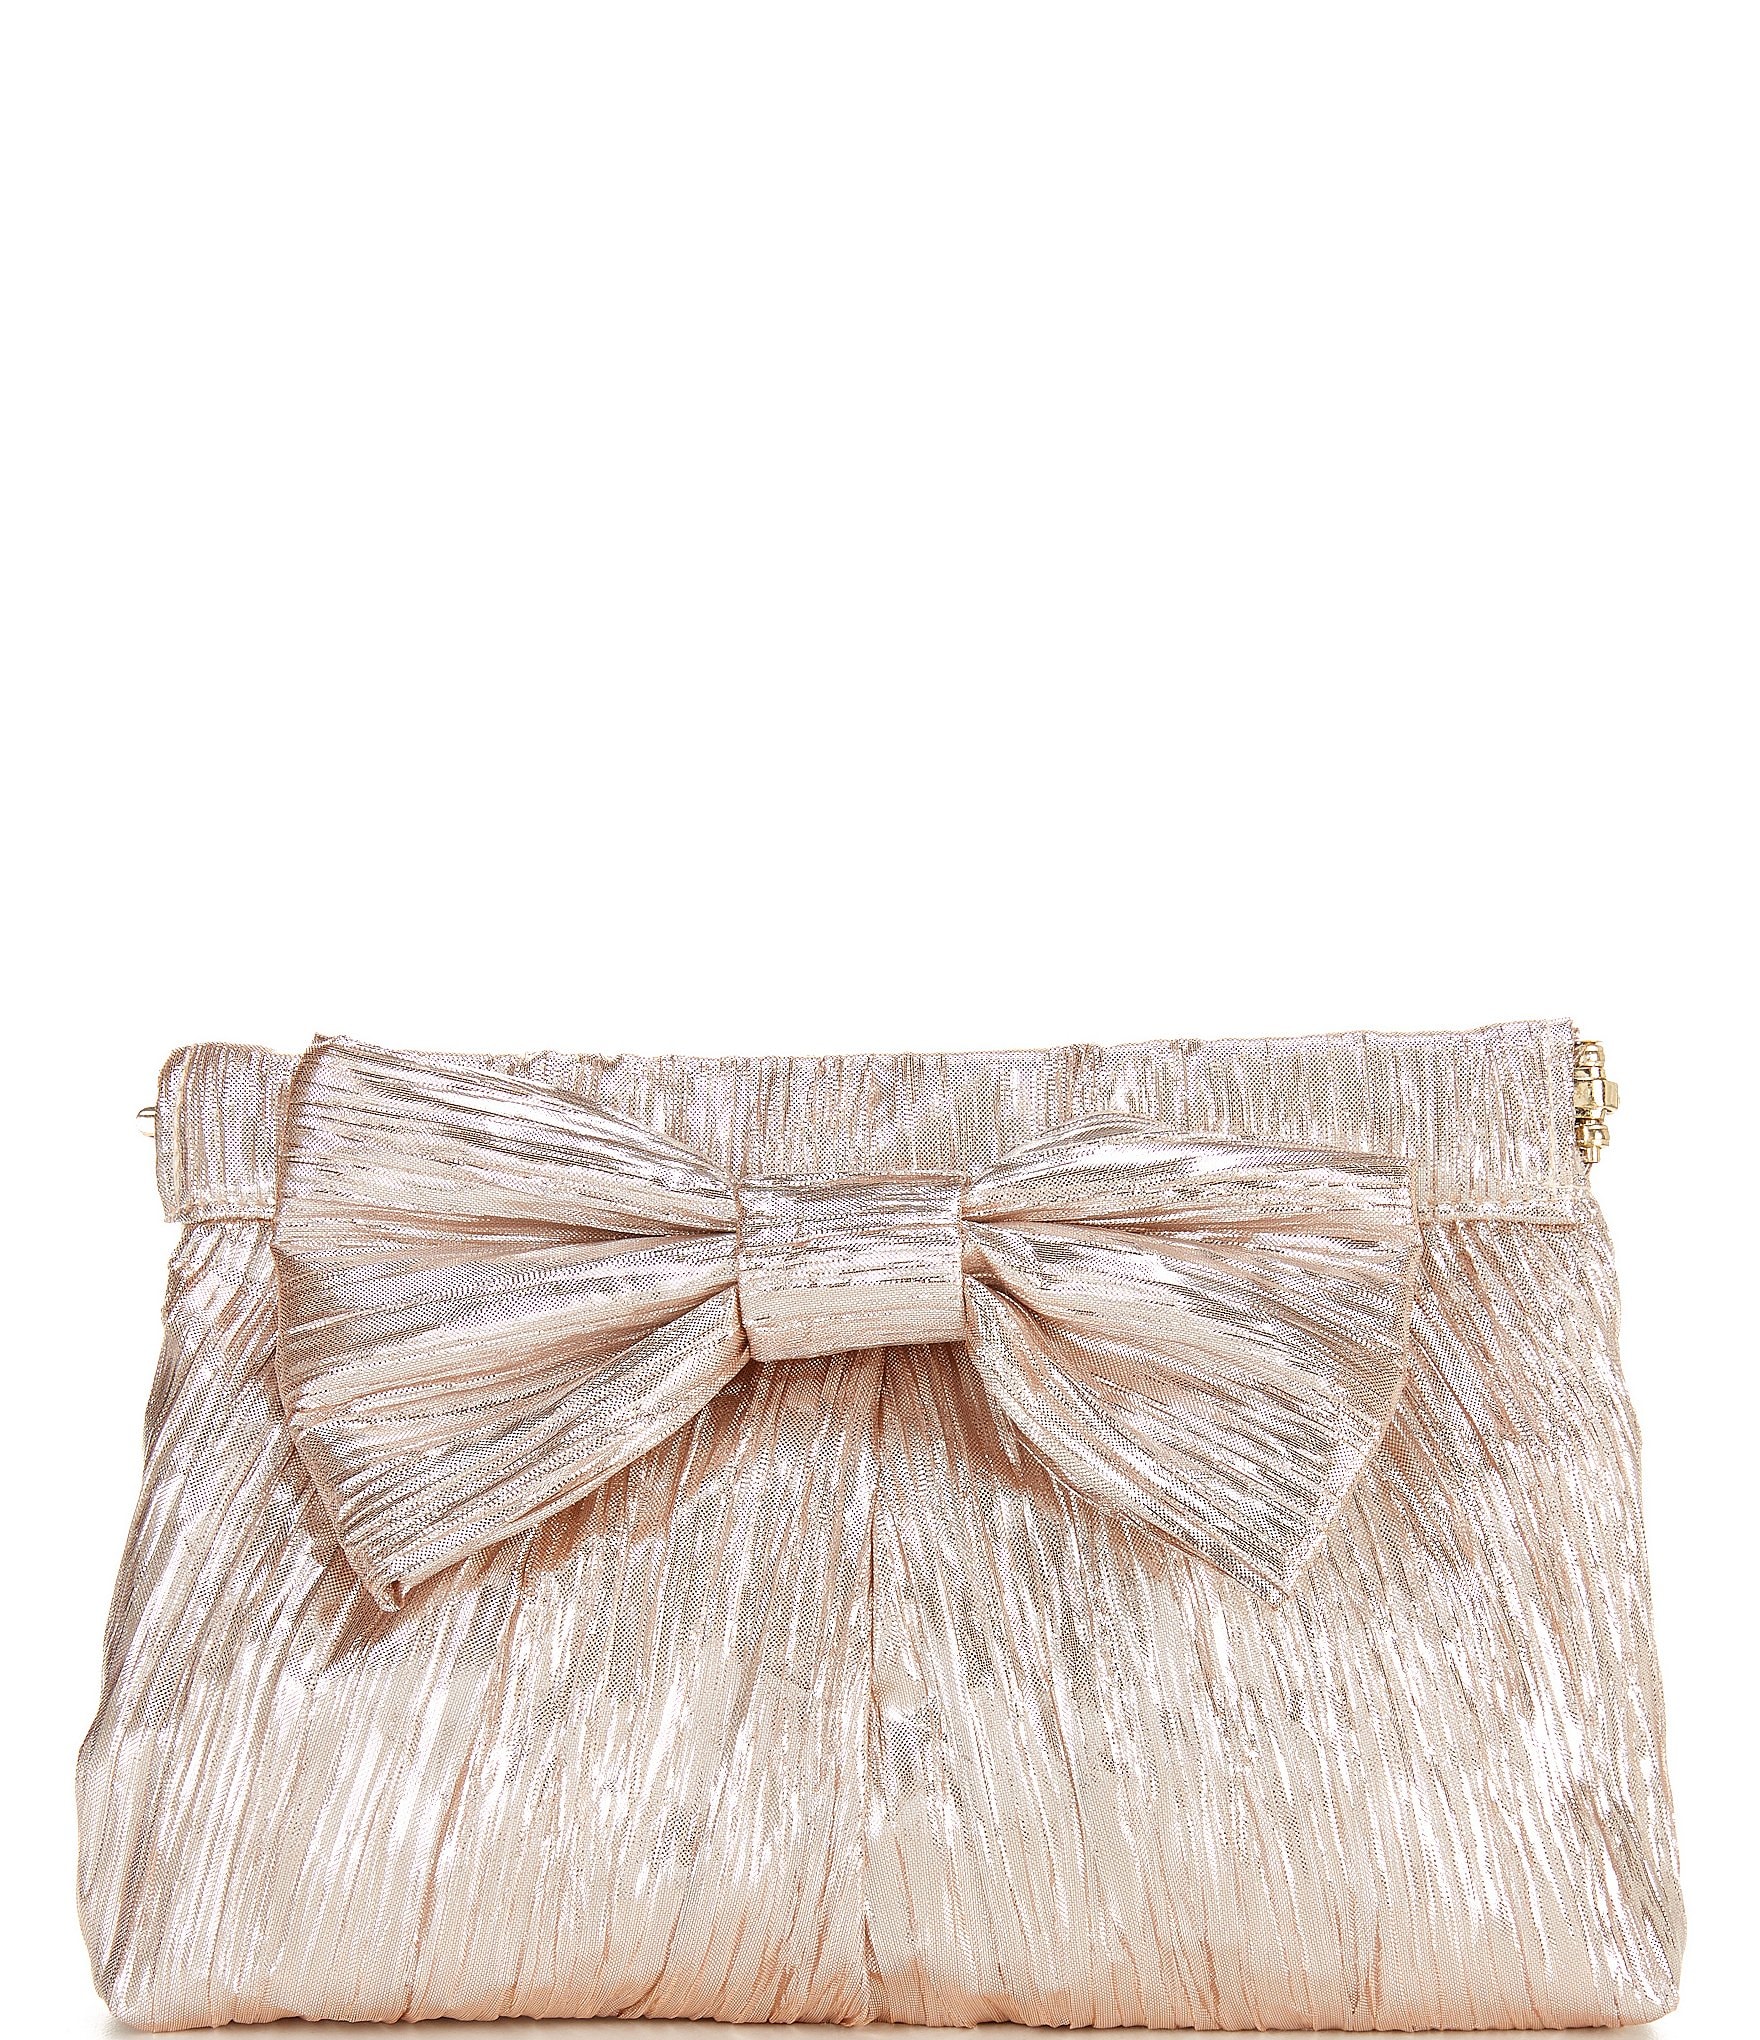 Talk me out of the Cuyana Bow Clutch? : r/handbags